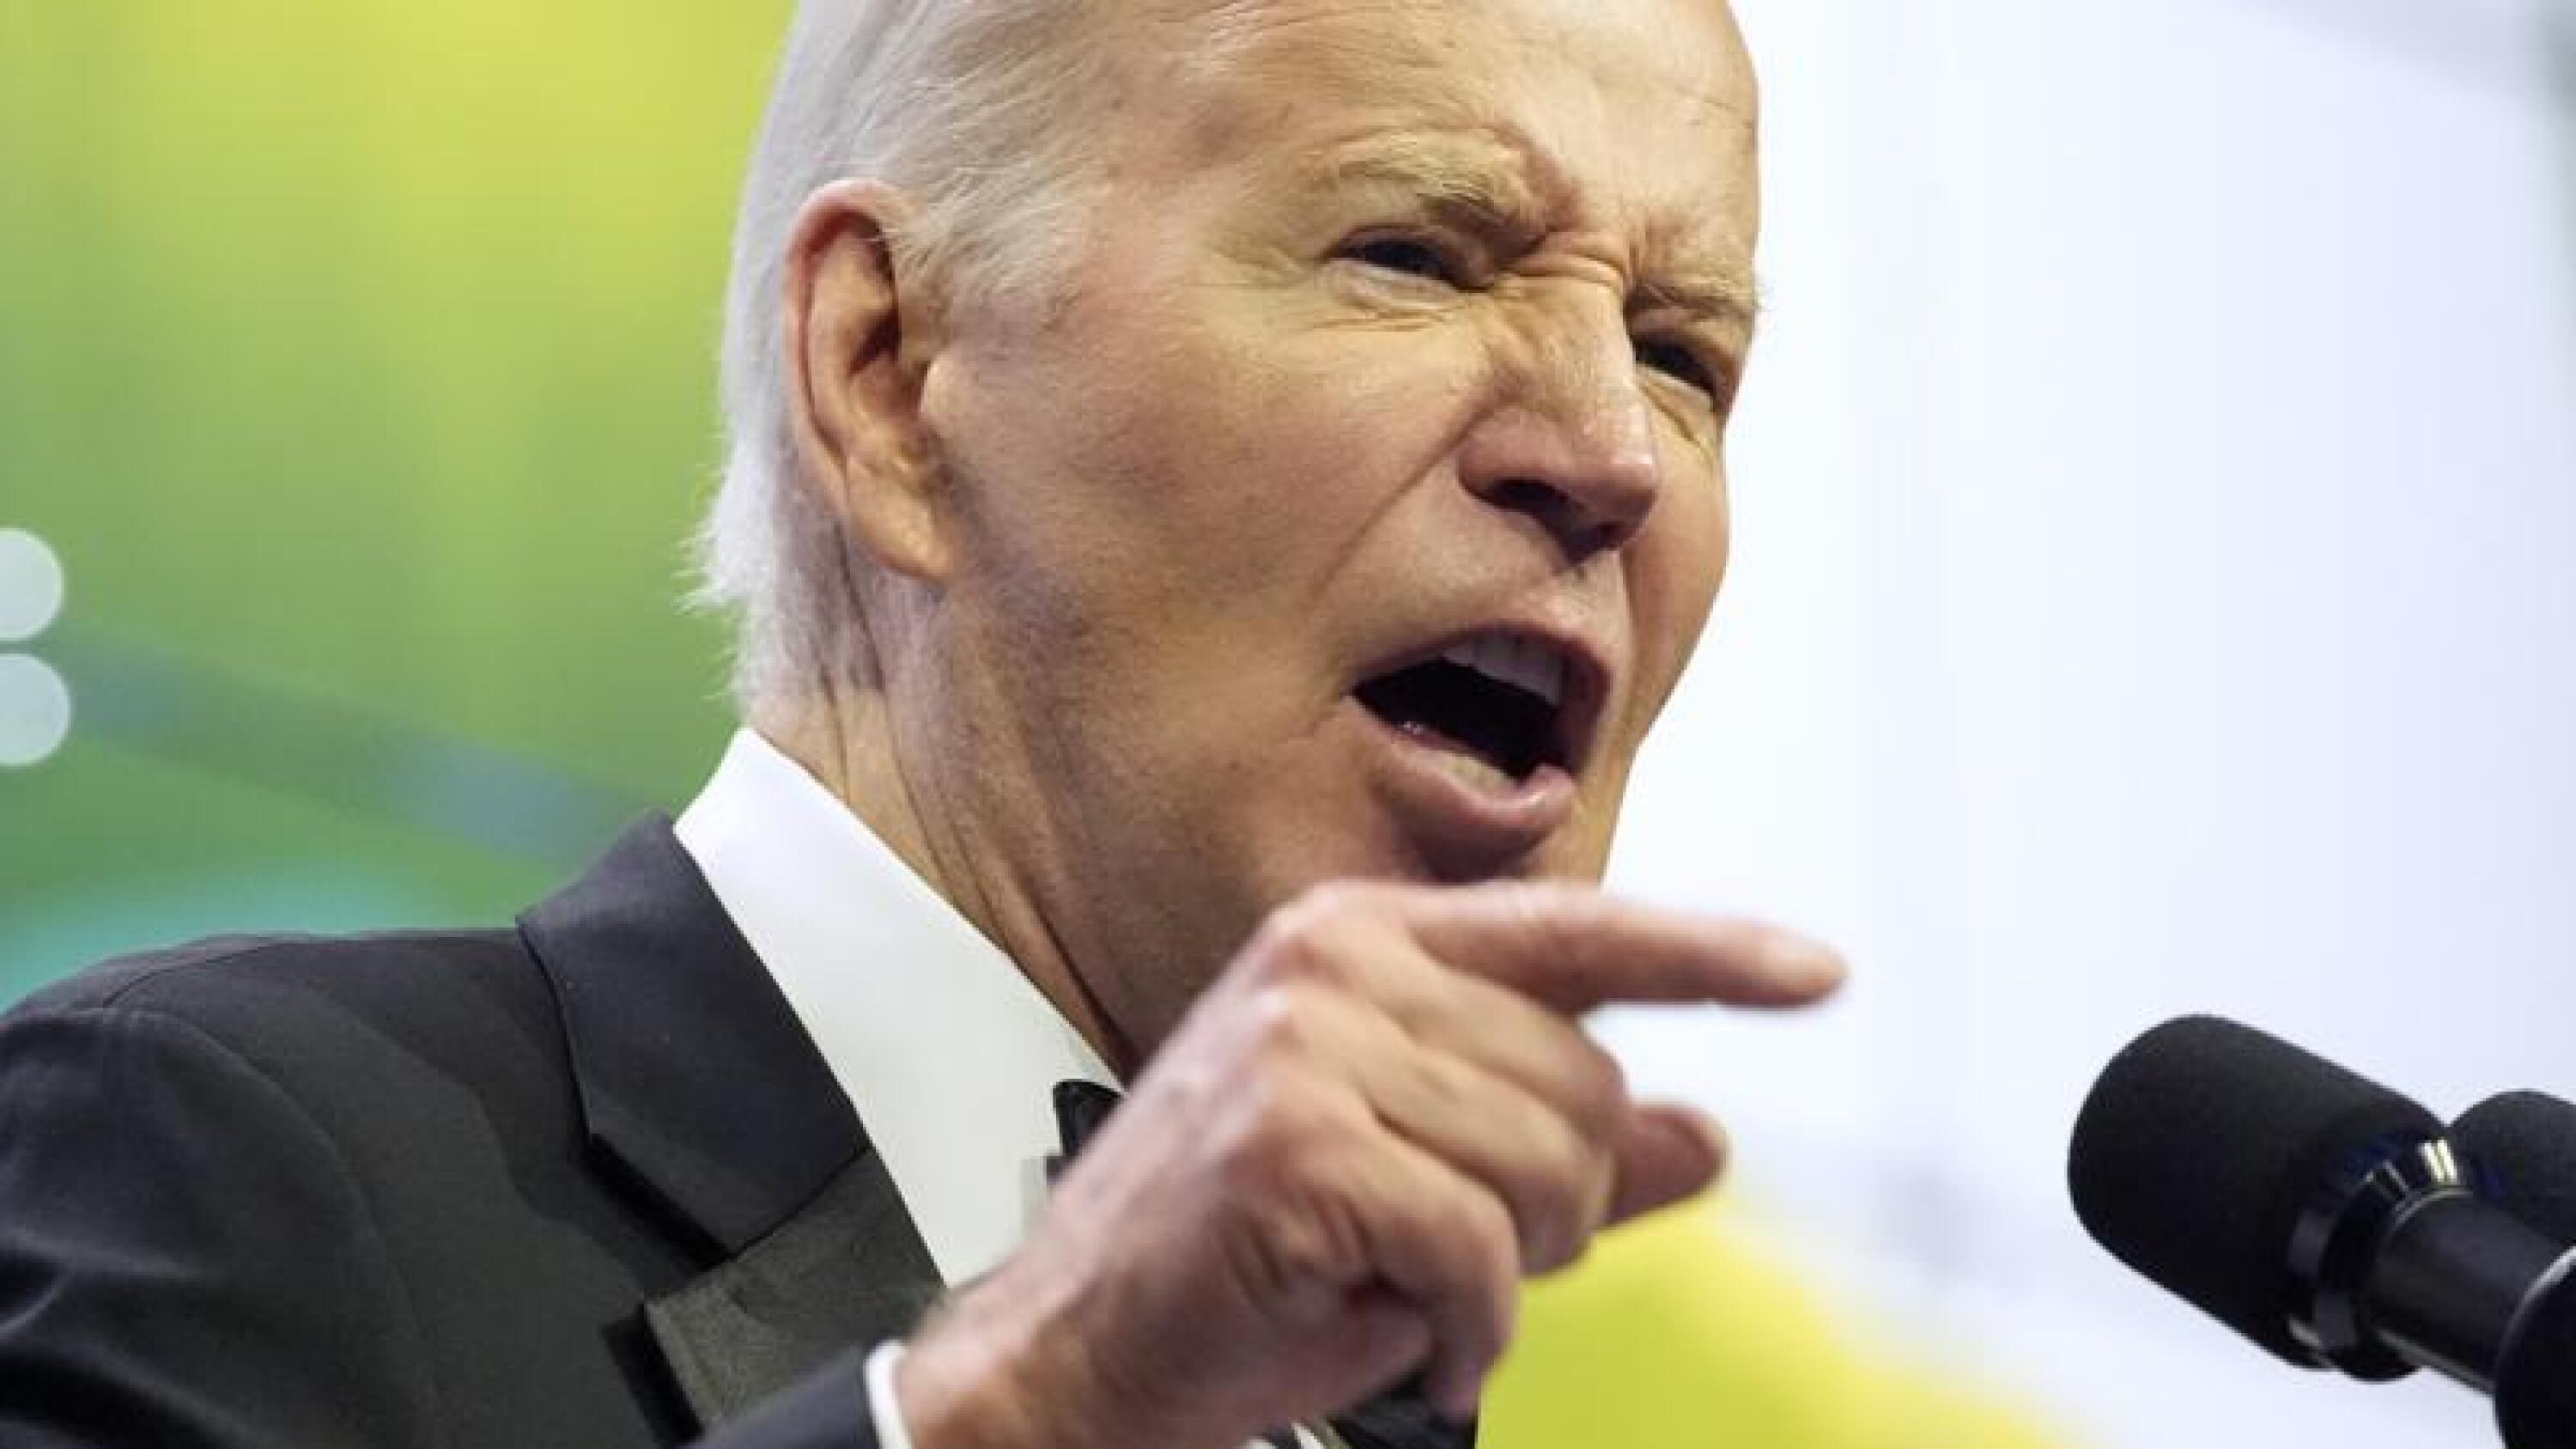 Biden administration is sending $1B more in weapons, ammo to Israel, congressional aides say